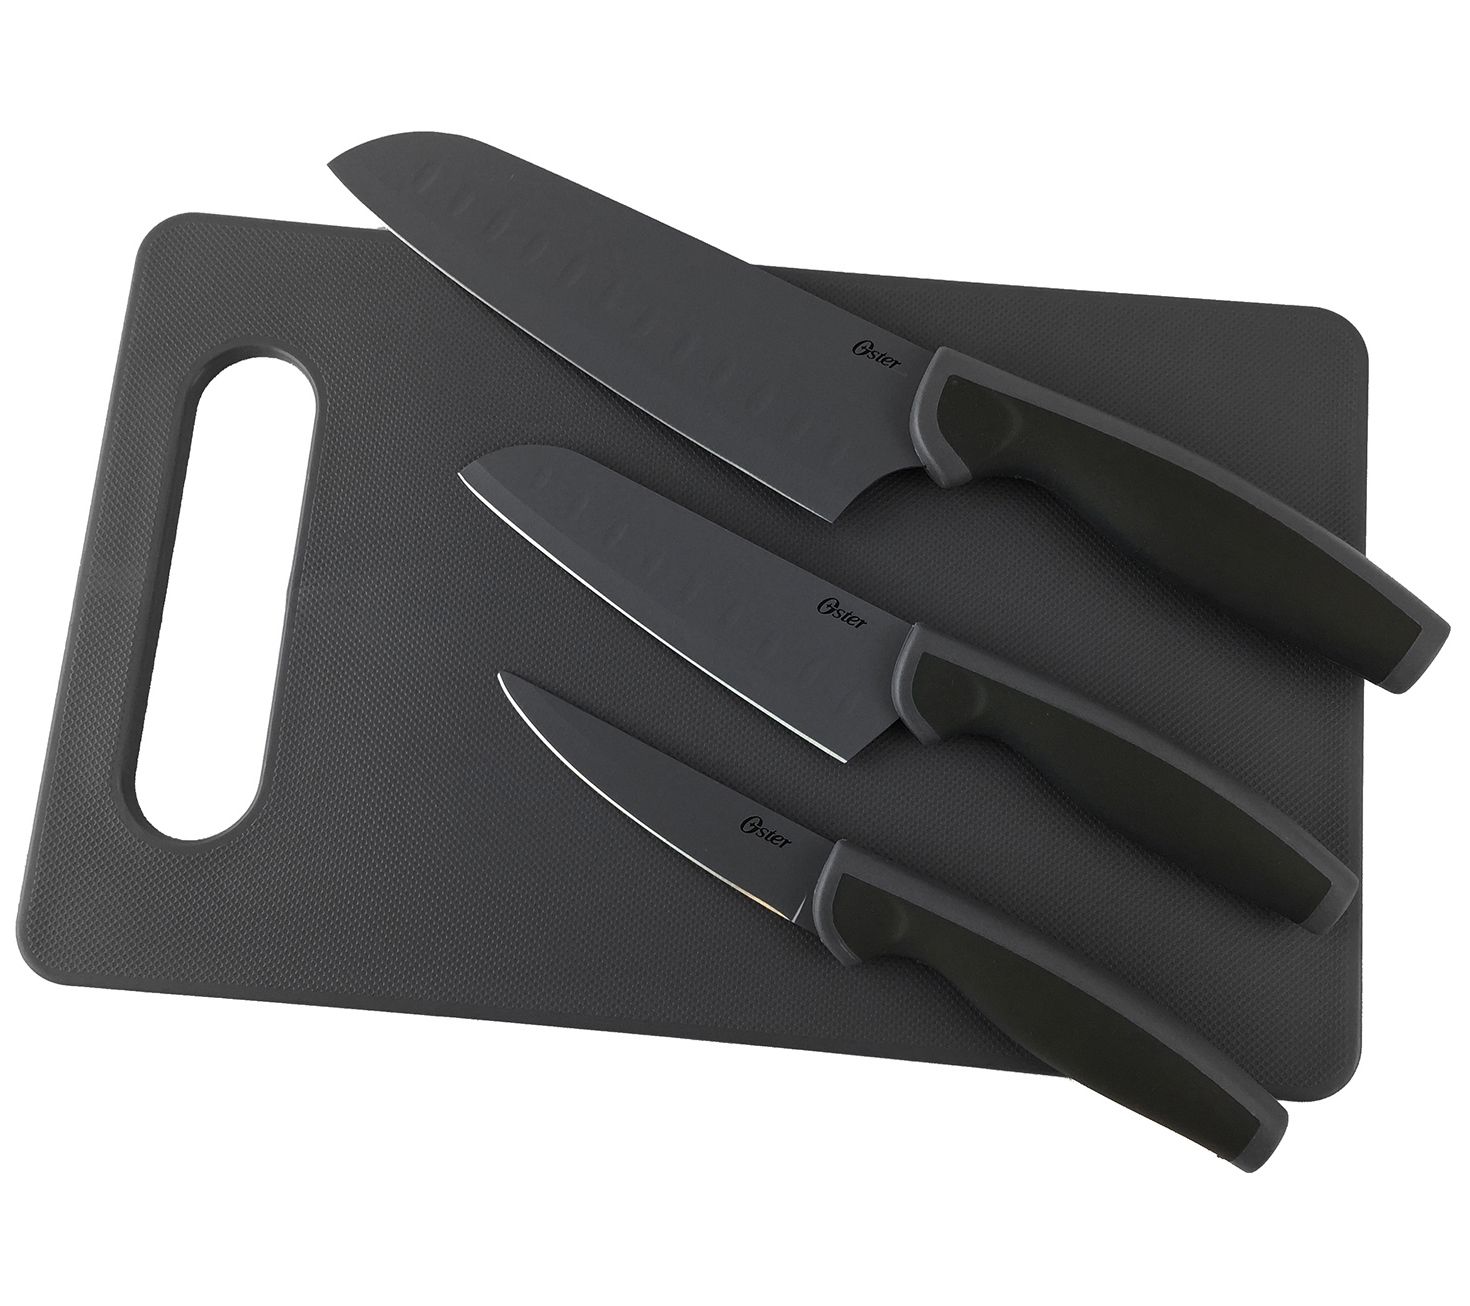 Cooking Light 6-Piece Cutlery Set with 11 x 14 Cutting Board